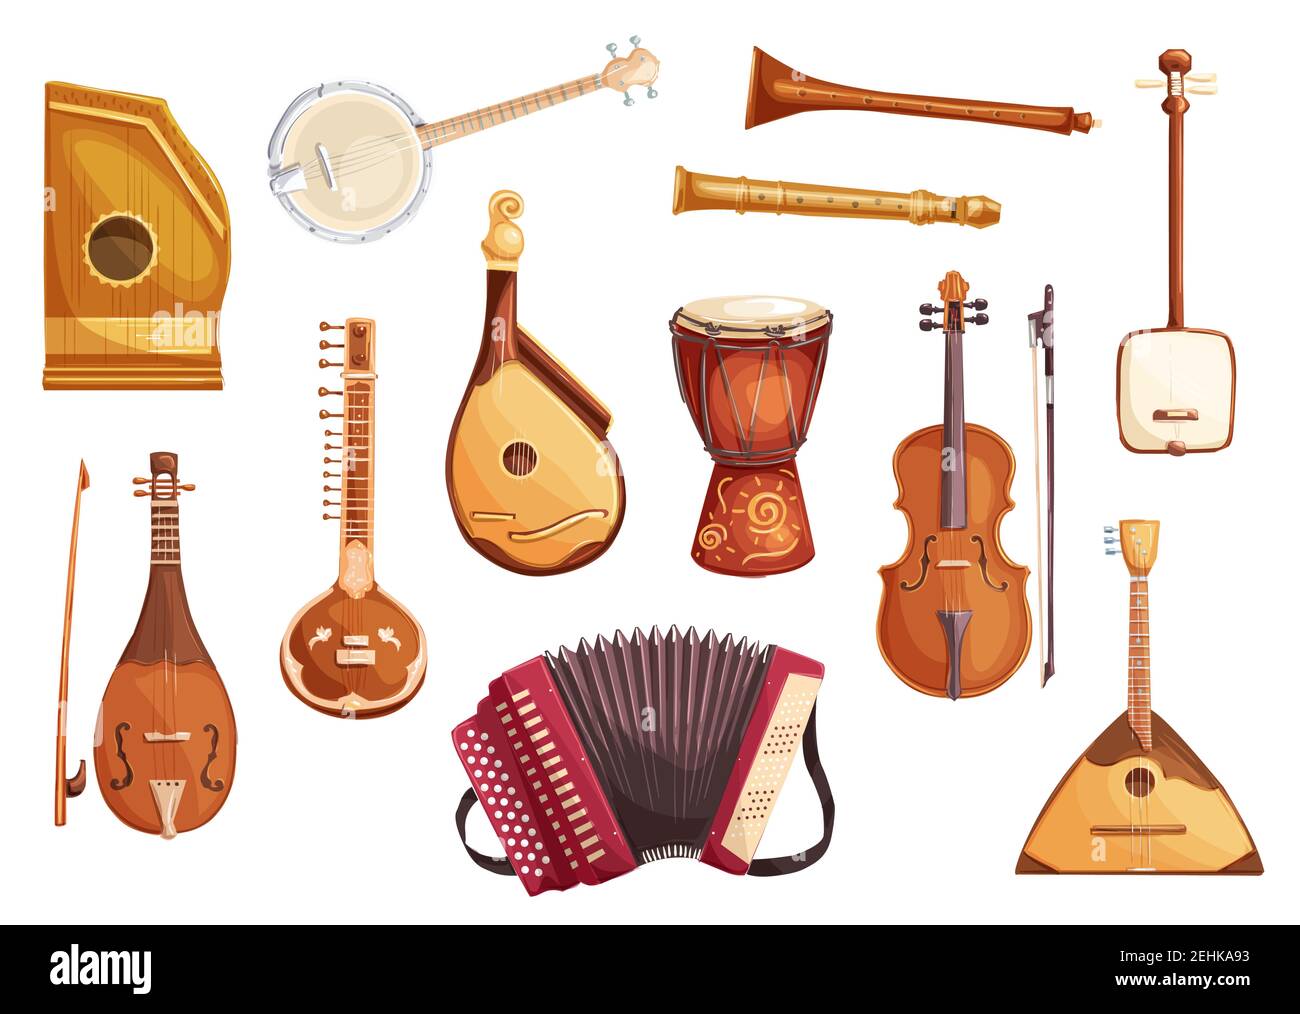 Folk music instruments watercolor icons of string, wind and percussion. Ethnic sitar, balalaika and djembe drum, banjo, viola and flute, zither, accor Stock Vector